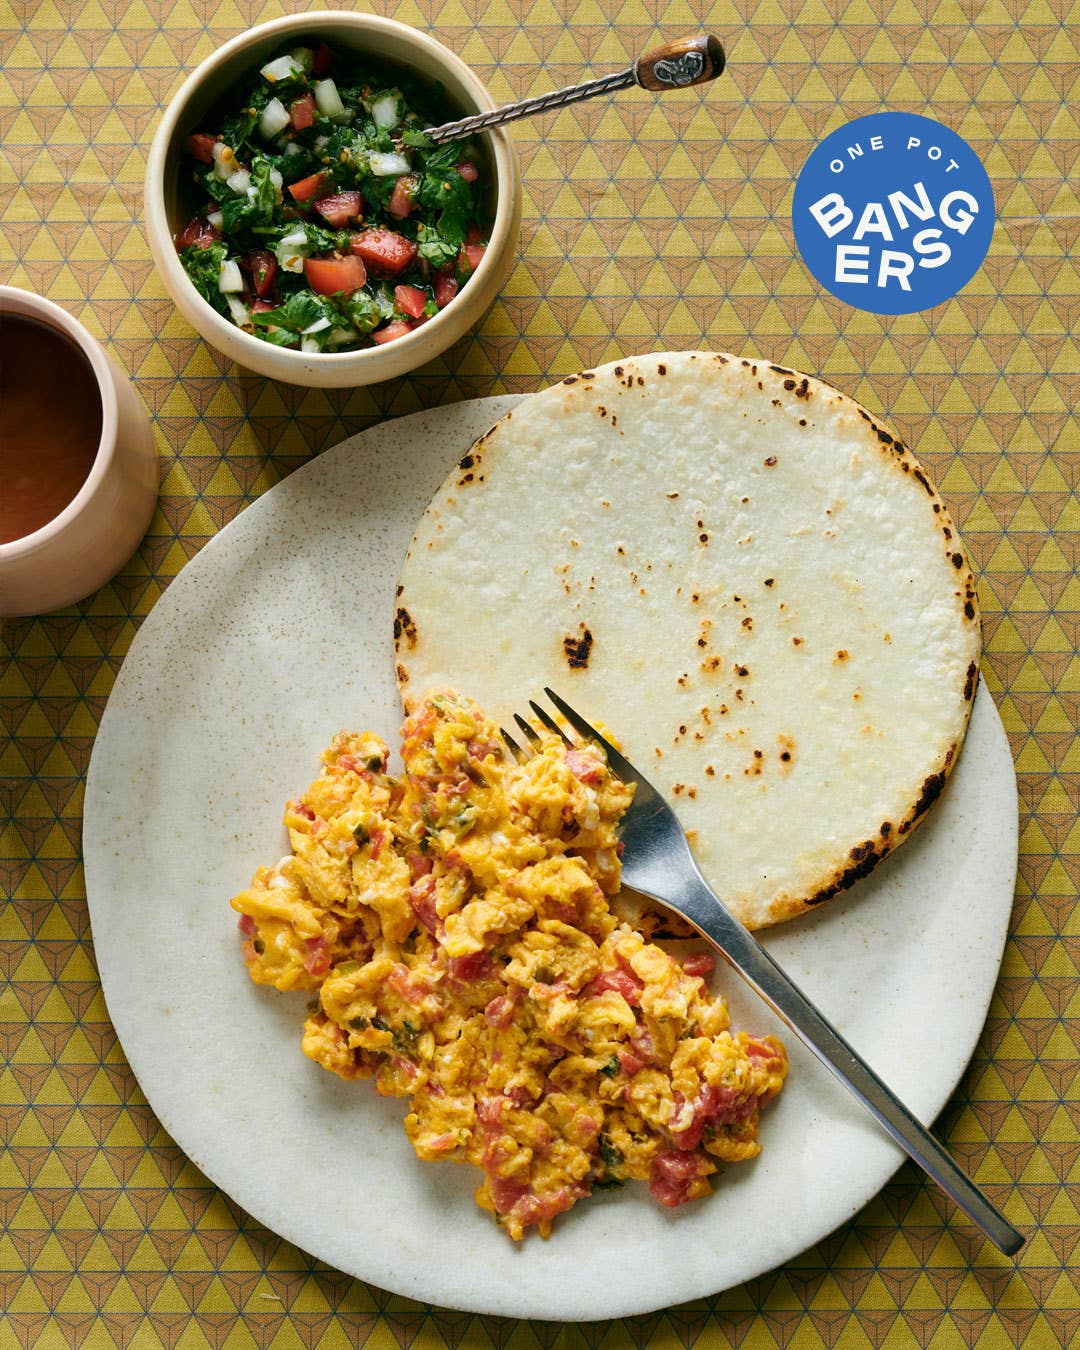 Colombian Breakfasts Are Underrated—And These Huevos Pericos Are Proof